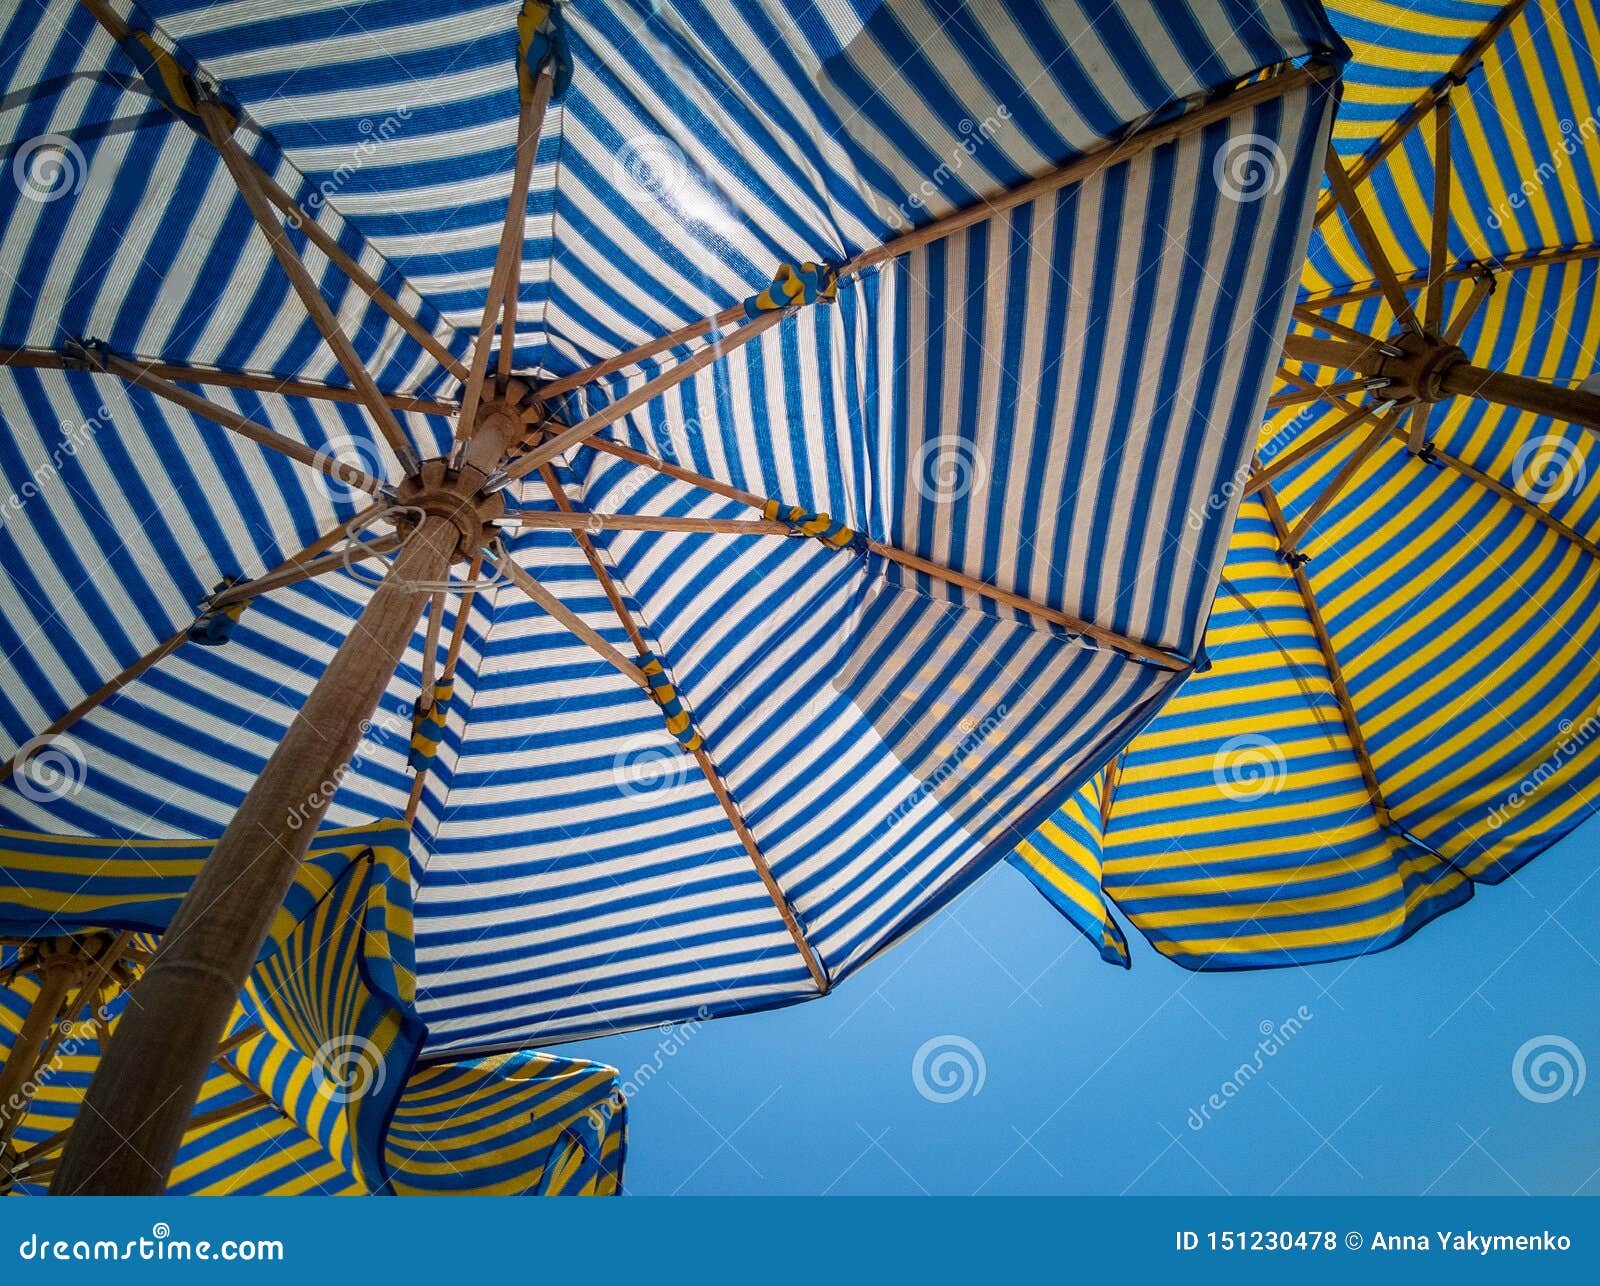 background of striped colored beach umbrellas, view from the bottom, against the sky